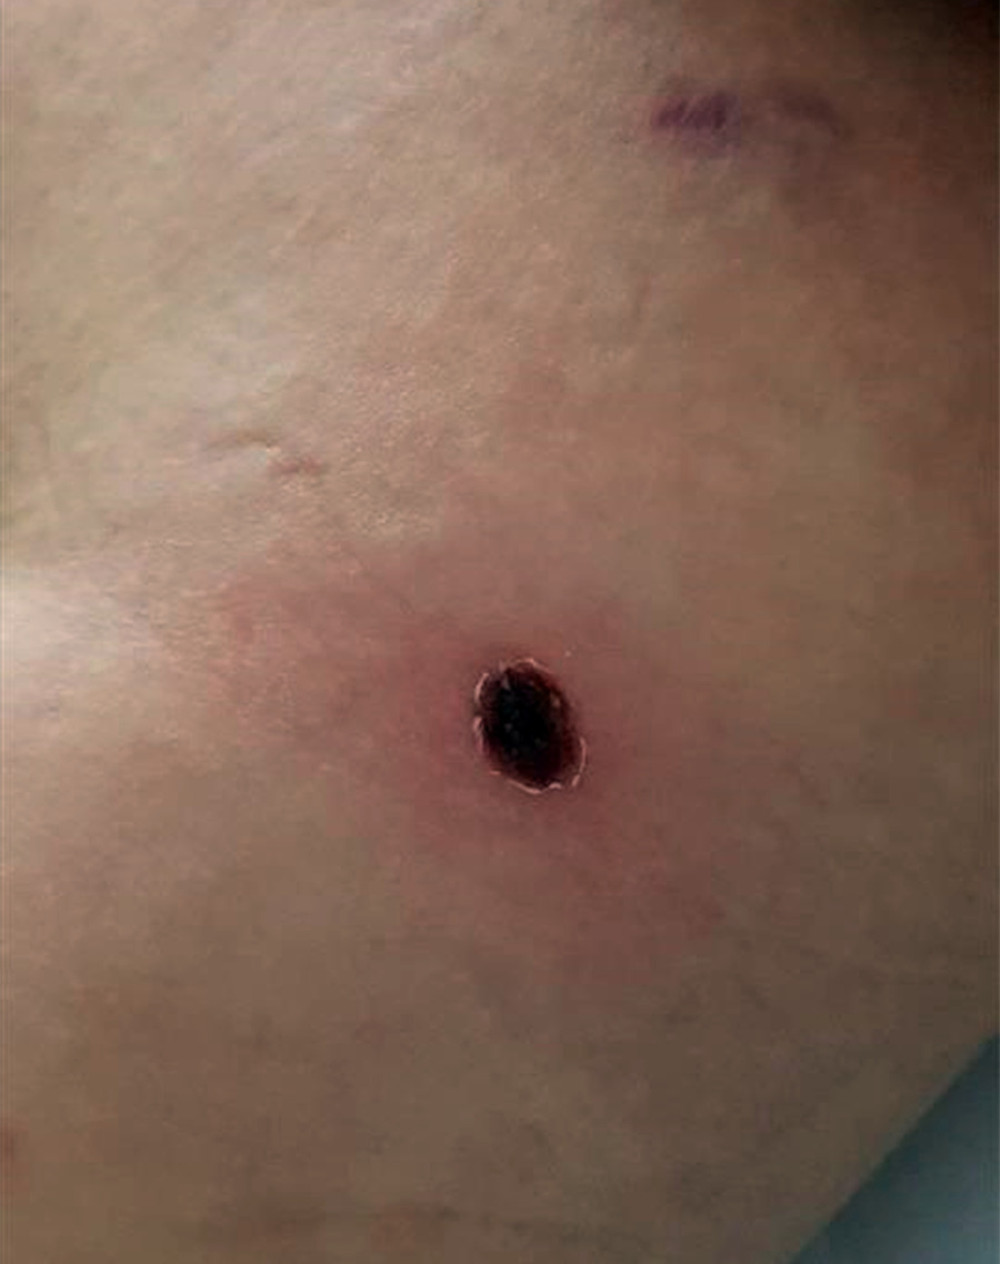 Eschar on the patient’s right thigh.